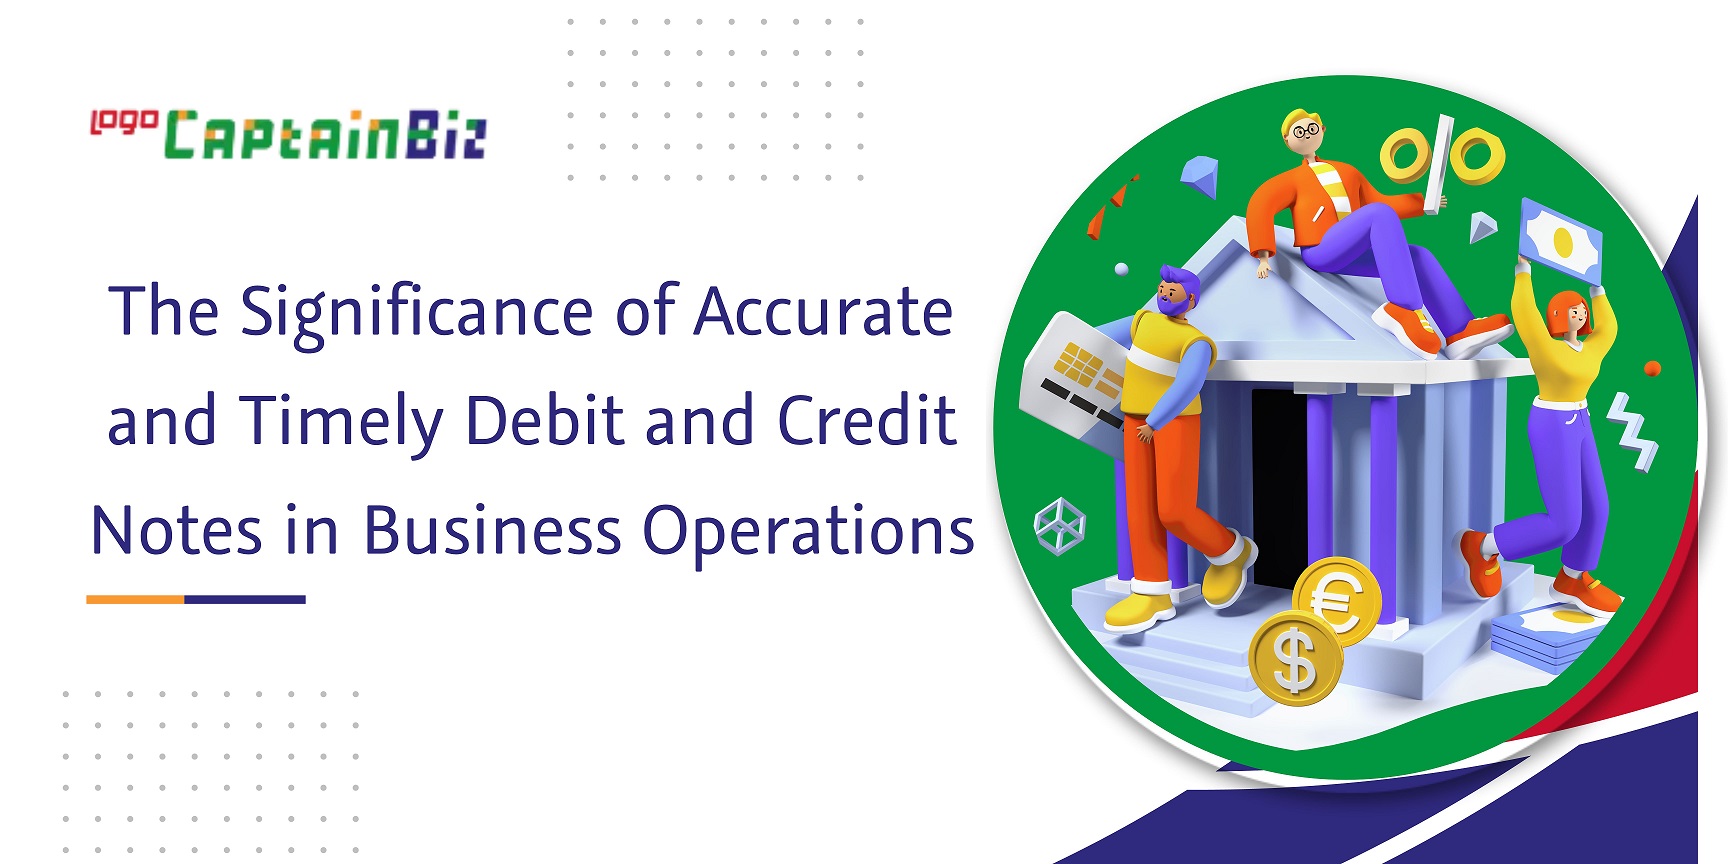 CaptainBiz: the significance of accurate and timely debit and credit notes in business operations